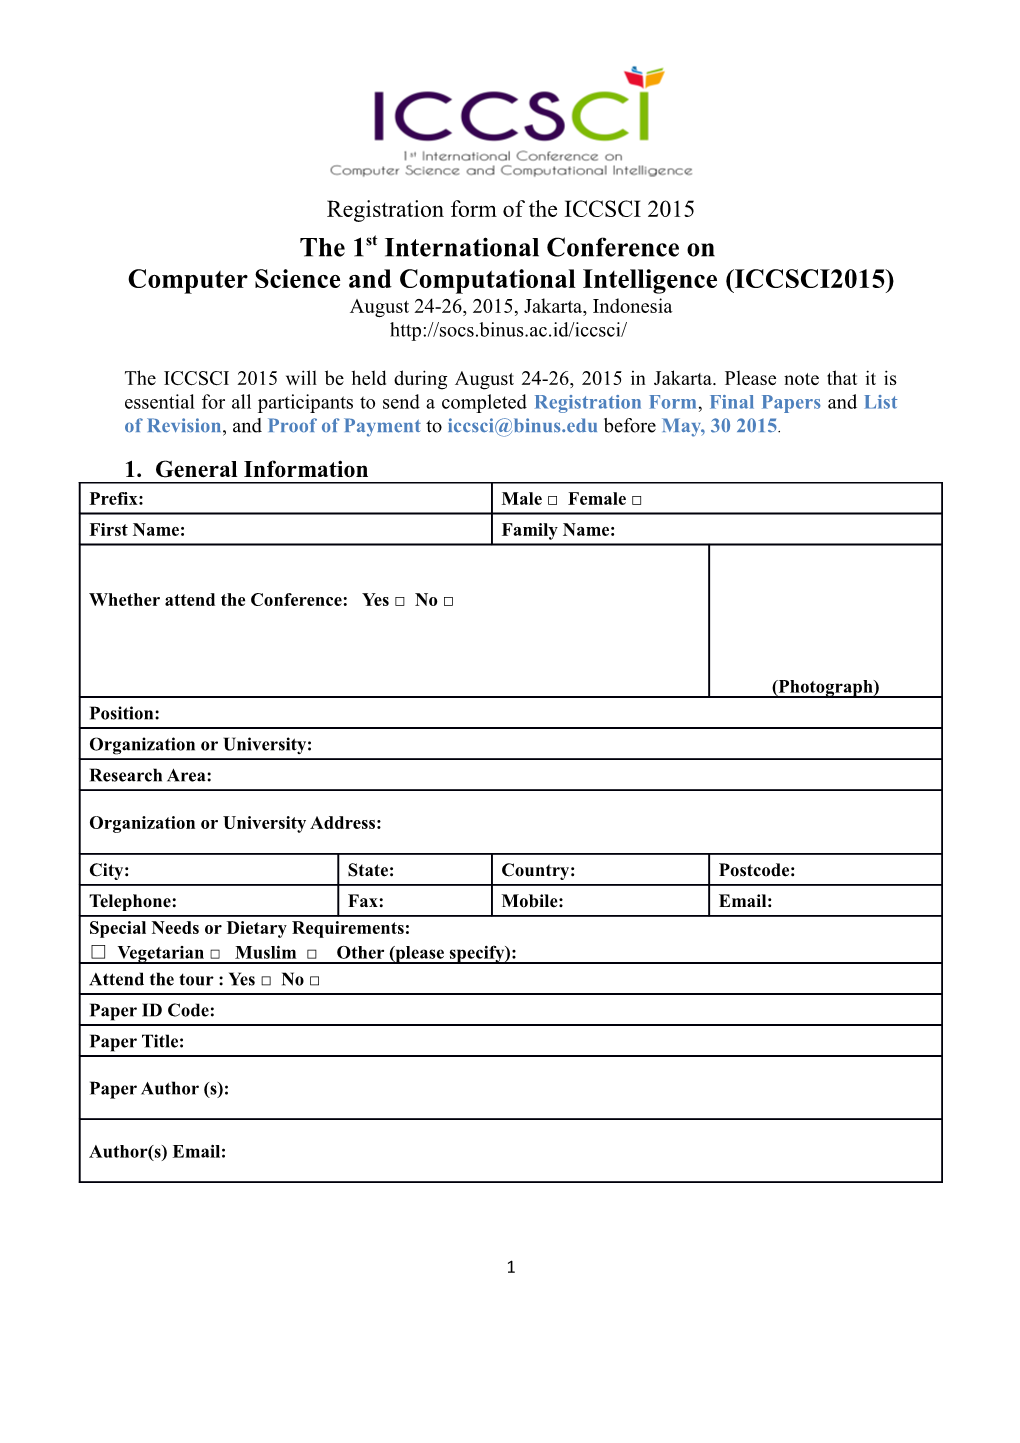 Registration Form of the ICCSCI 2015